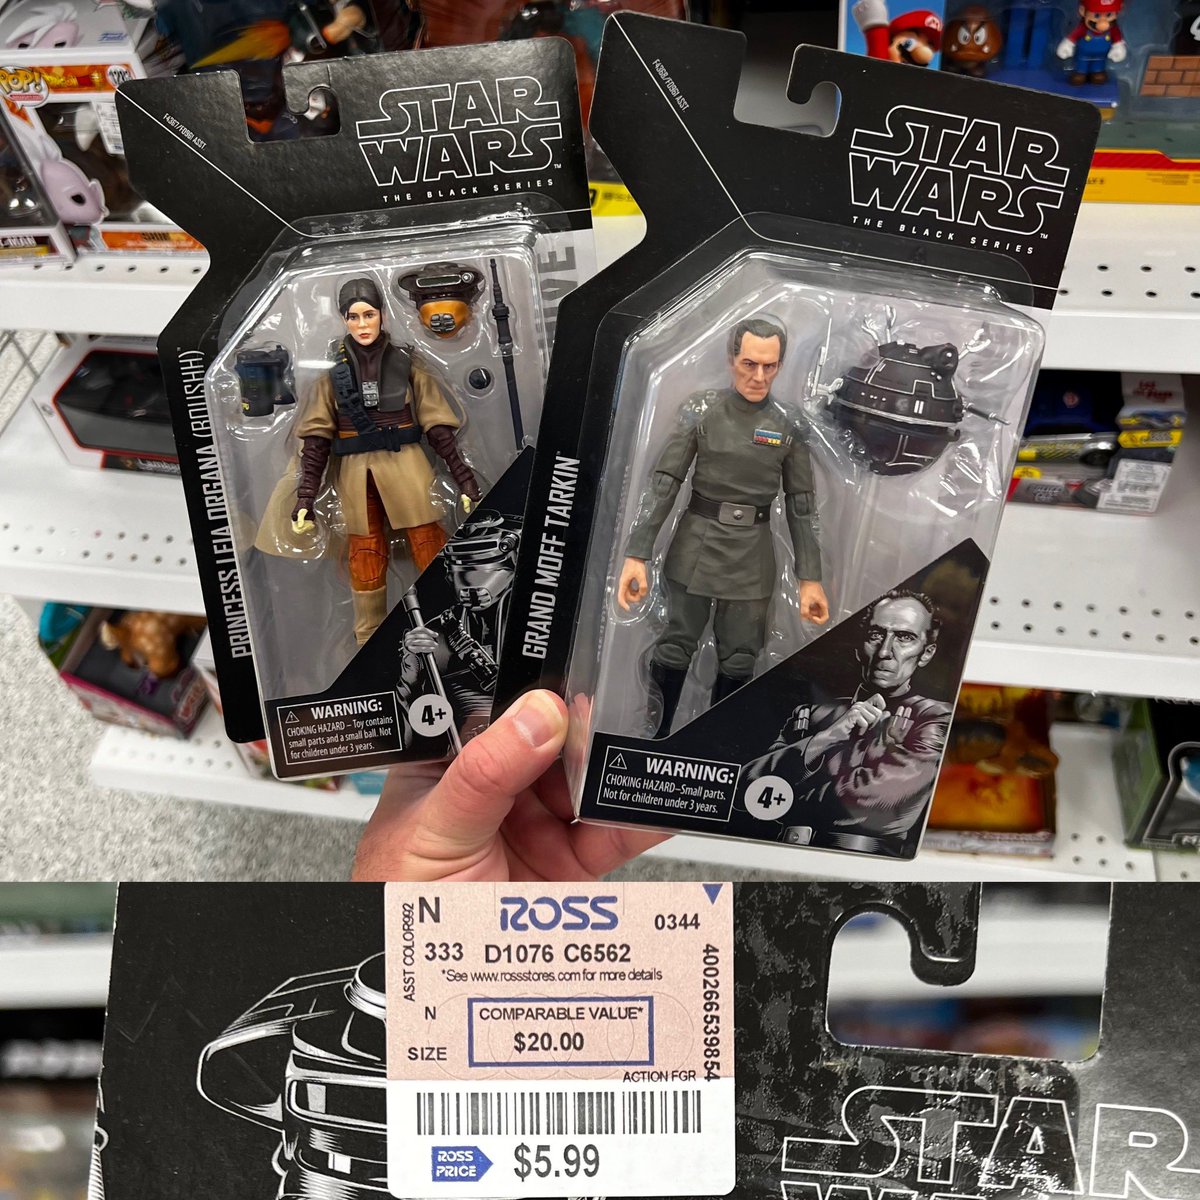 Found a few of the $6 Star Wars The Black Series figures at Ross in Peoria, AZ. 

#starwarstheblackseries #blackseries #blackseries6inch #starwars #starwarsfigures #starwarstoys #rossfinds #clearancefinds #toynews #toysale #toycommunity #actionfigures #inpursuitoftoys